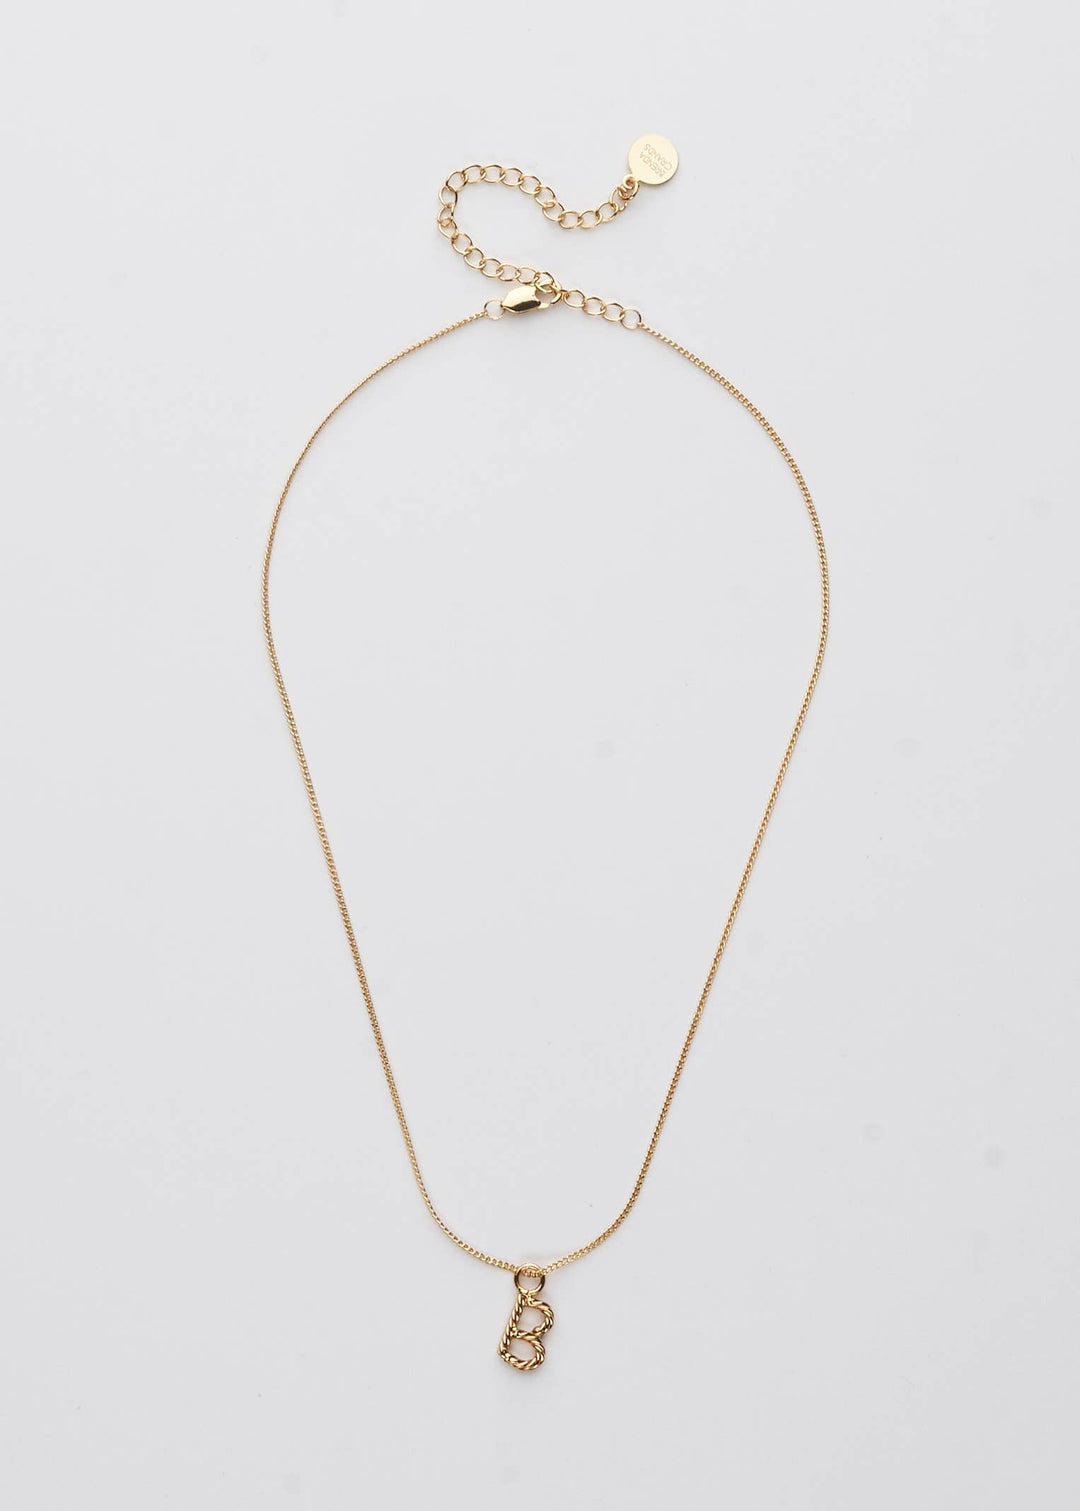 Aspen Initial Mini Necklace: Holiday Favorite!: B / 14"+3"